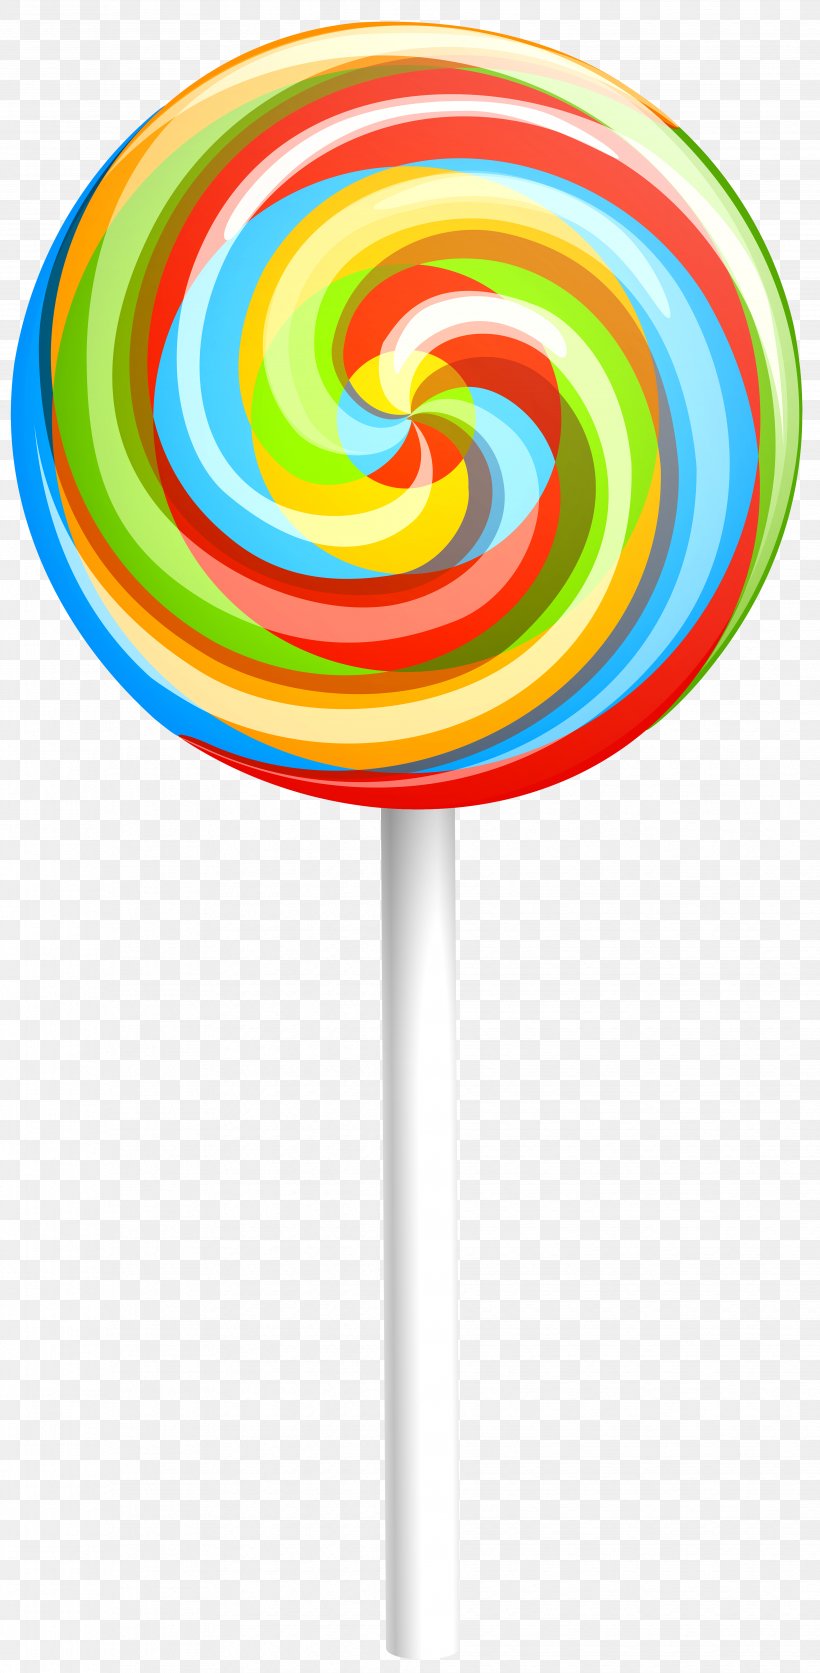 Lollipop Clip Art Openclipart Image, PNG, 3919x8000px, Lollipop, Art, Candy, Chupa Chups, Confectionery Download Free